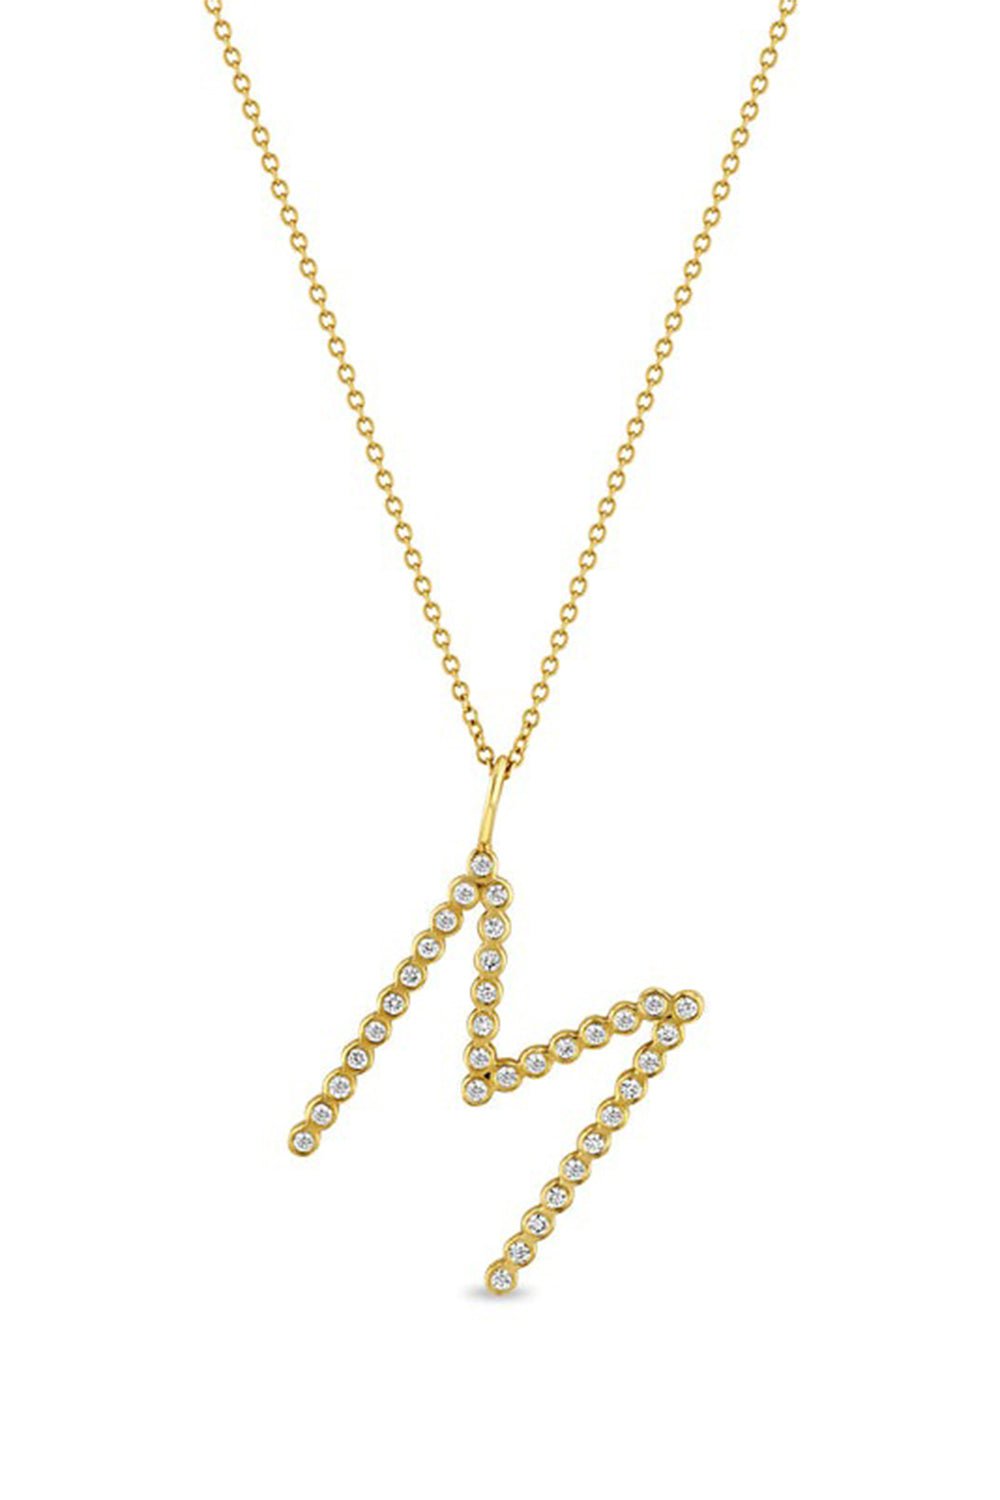 ZOE CHICCO-Small Letter Bezel Necklace-YELLOW GOLD